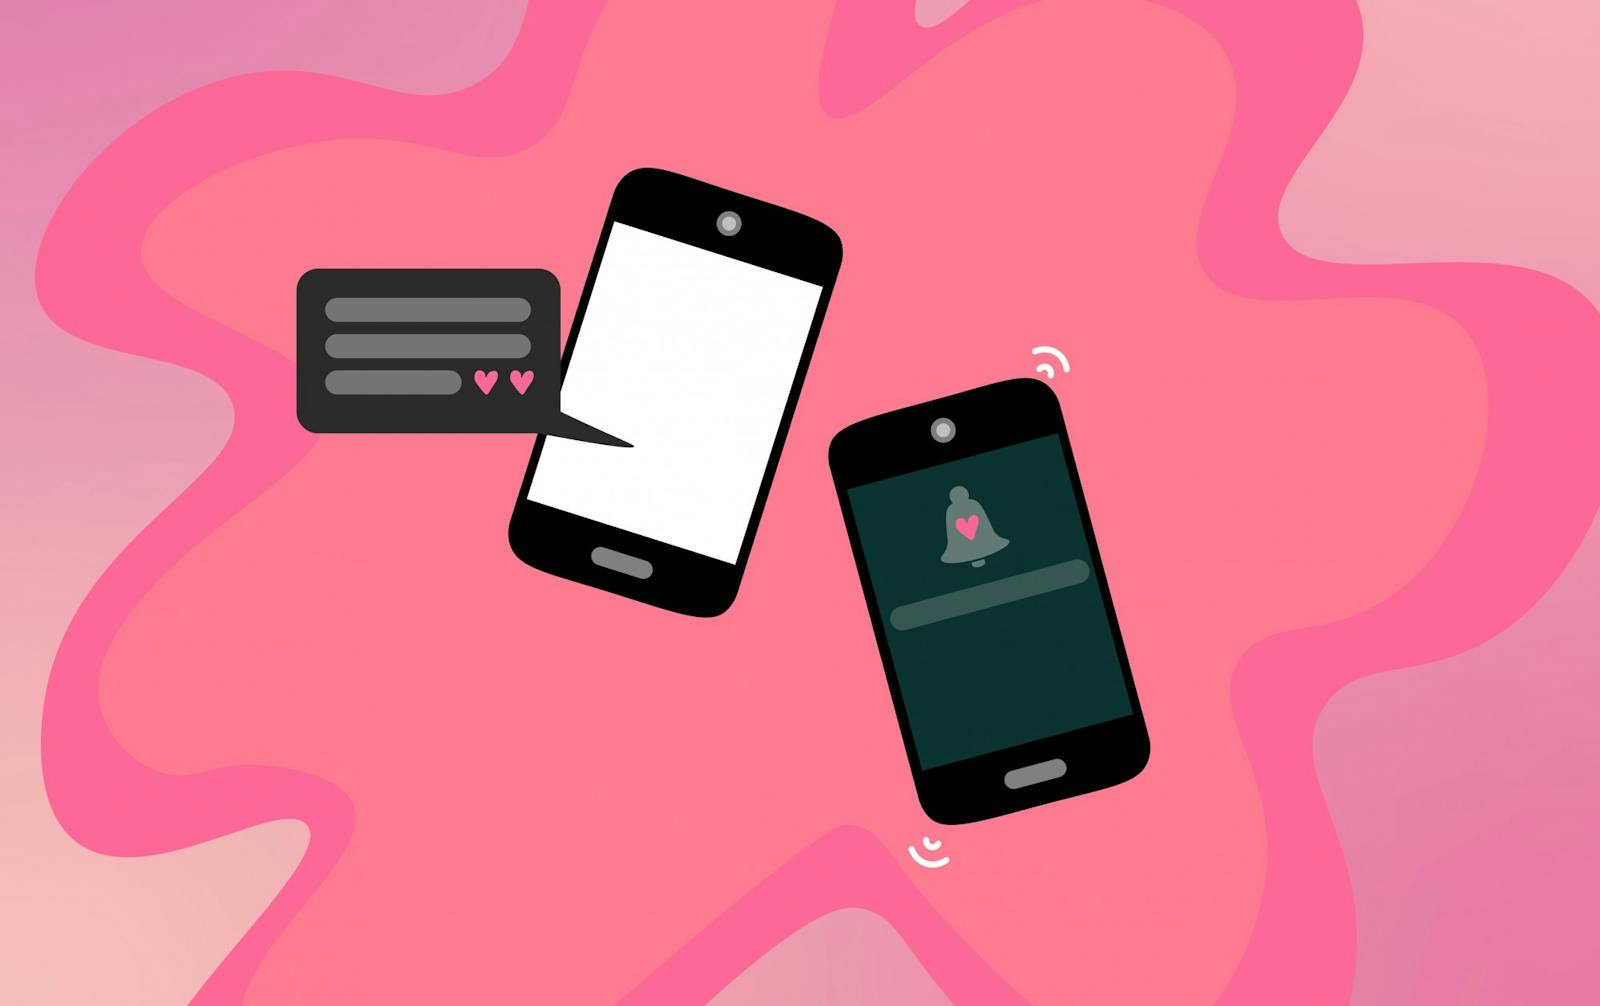 Tinder introduces a way for members to go on virtual 'blind dates